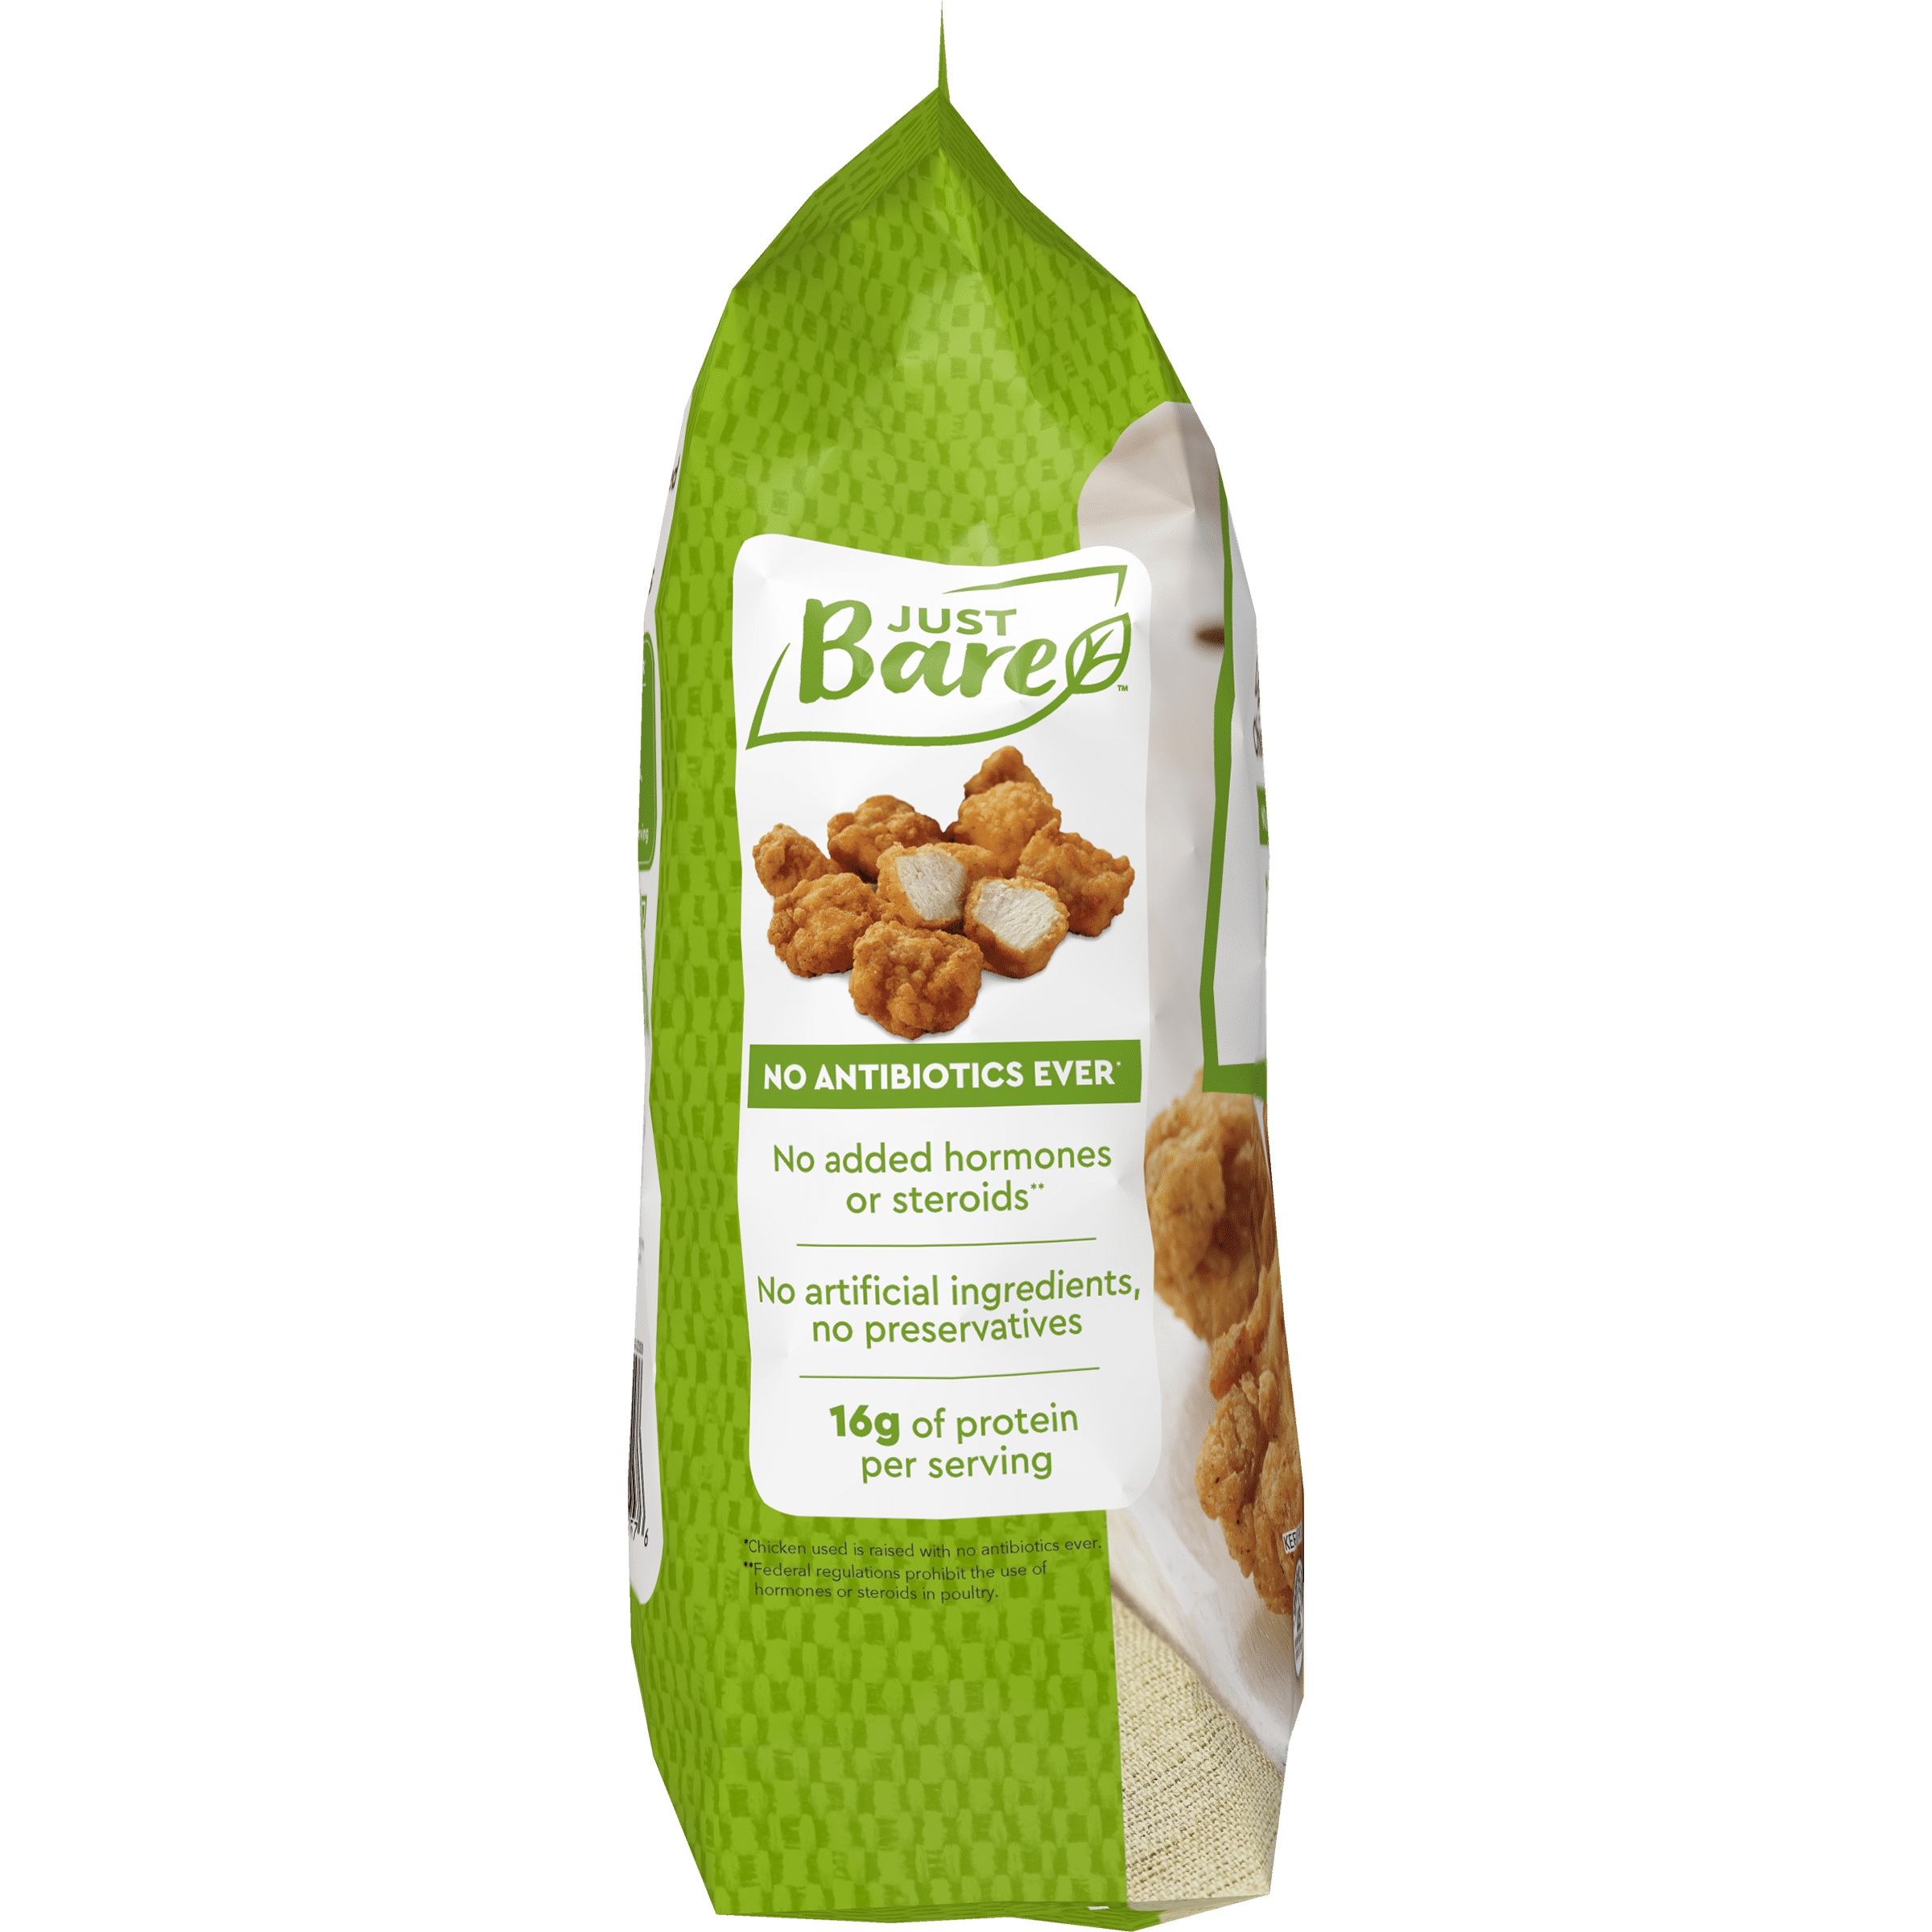 Just Bare Chicken Breast Bites, Lightly Breaded – RoomBox